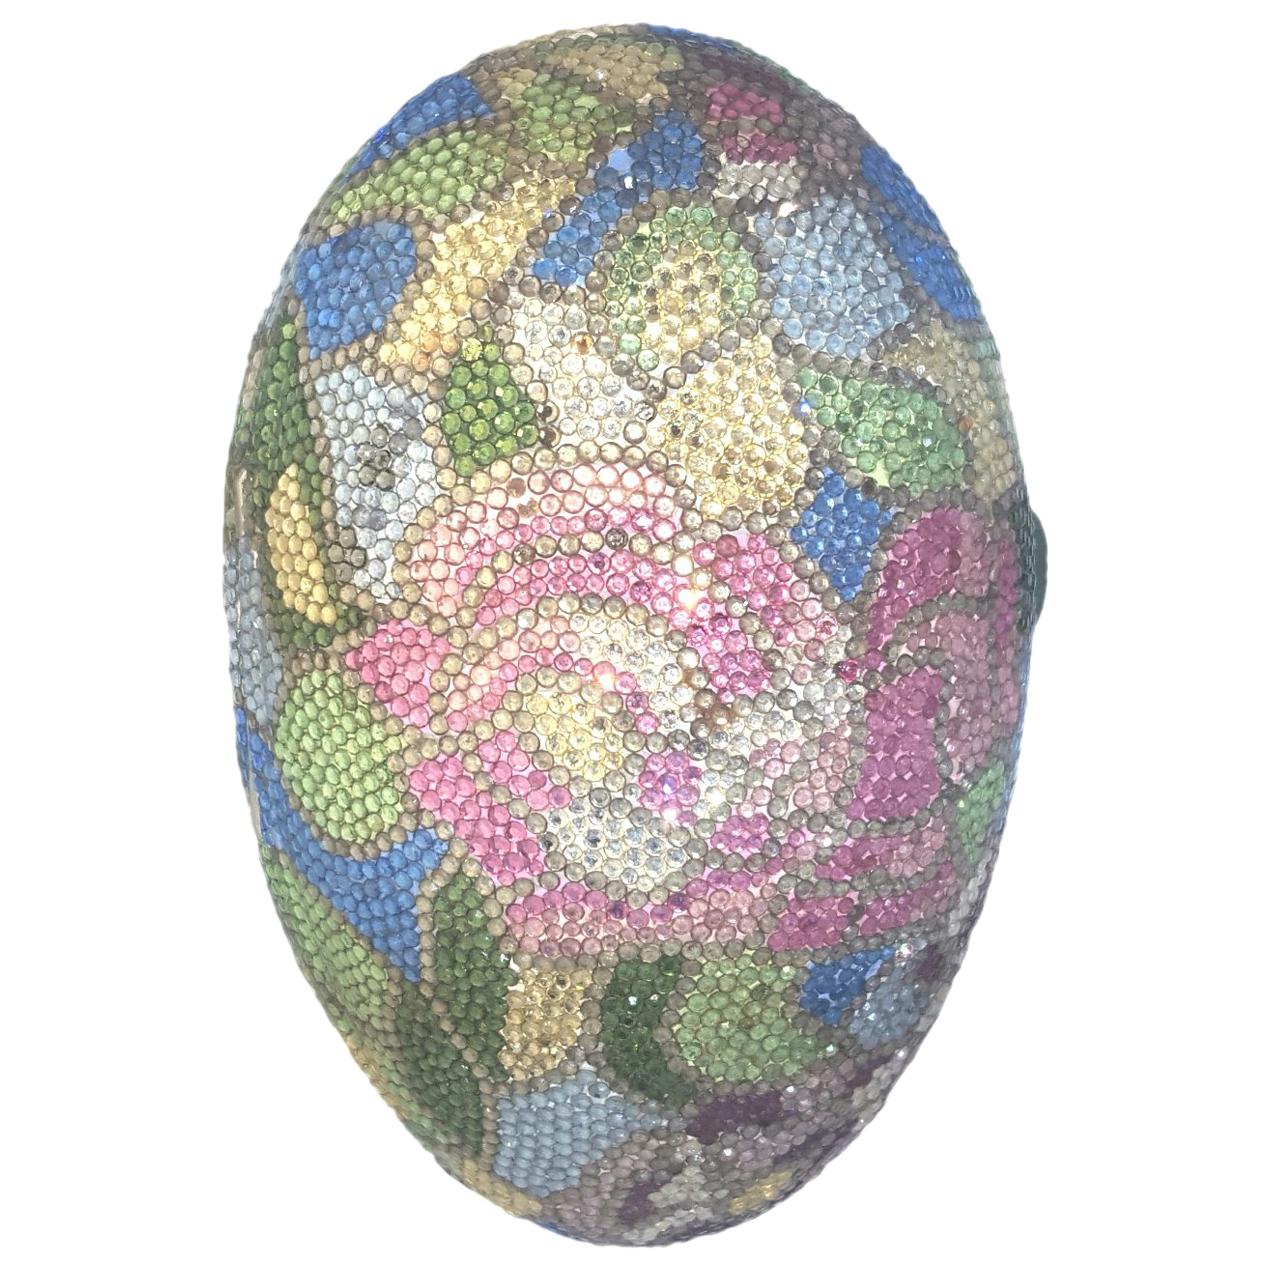 Judith Leiber "Easter" Egg Decorated with Swarovski Created Pink Flowers 